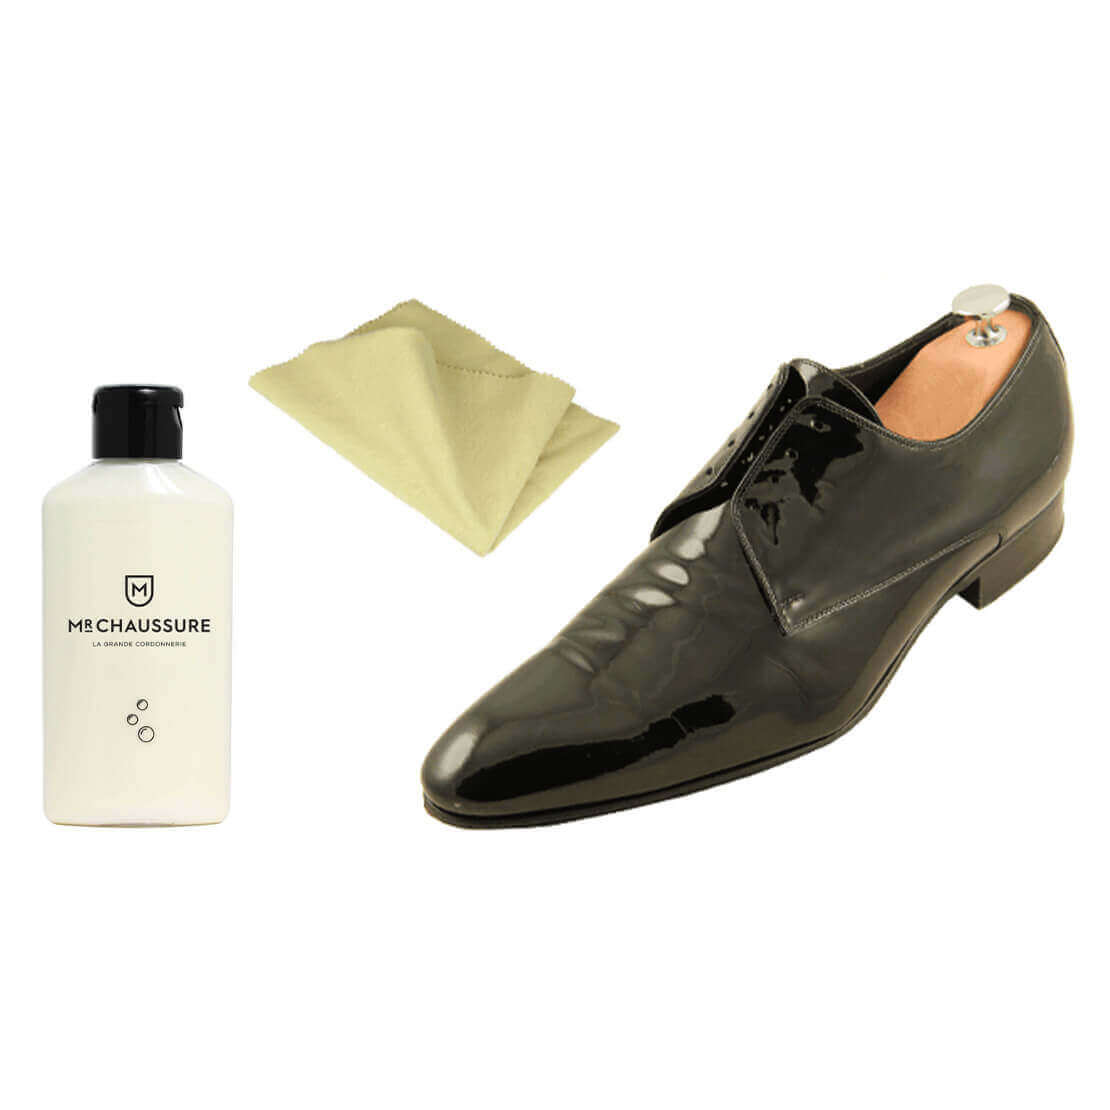 How to Clean Patent Leather Shoes